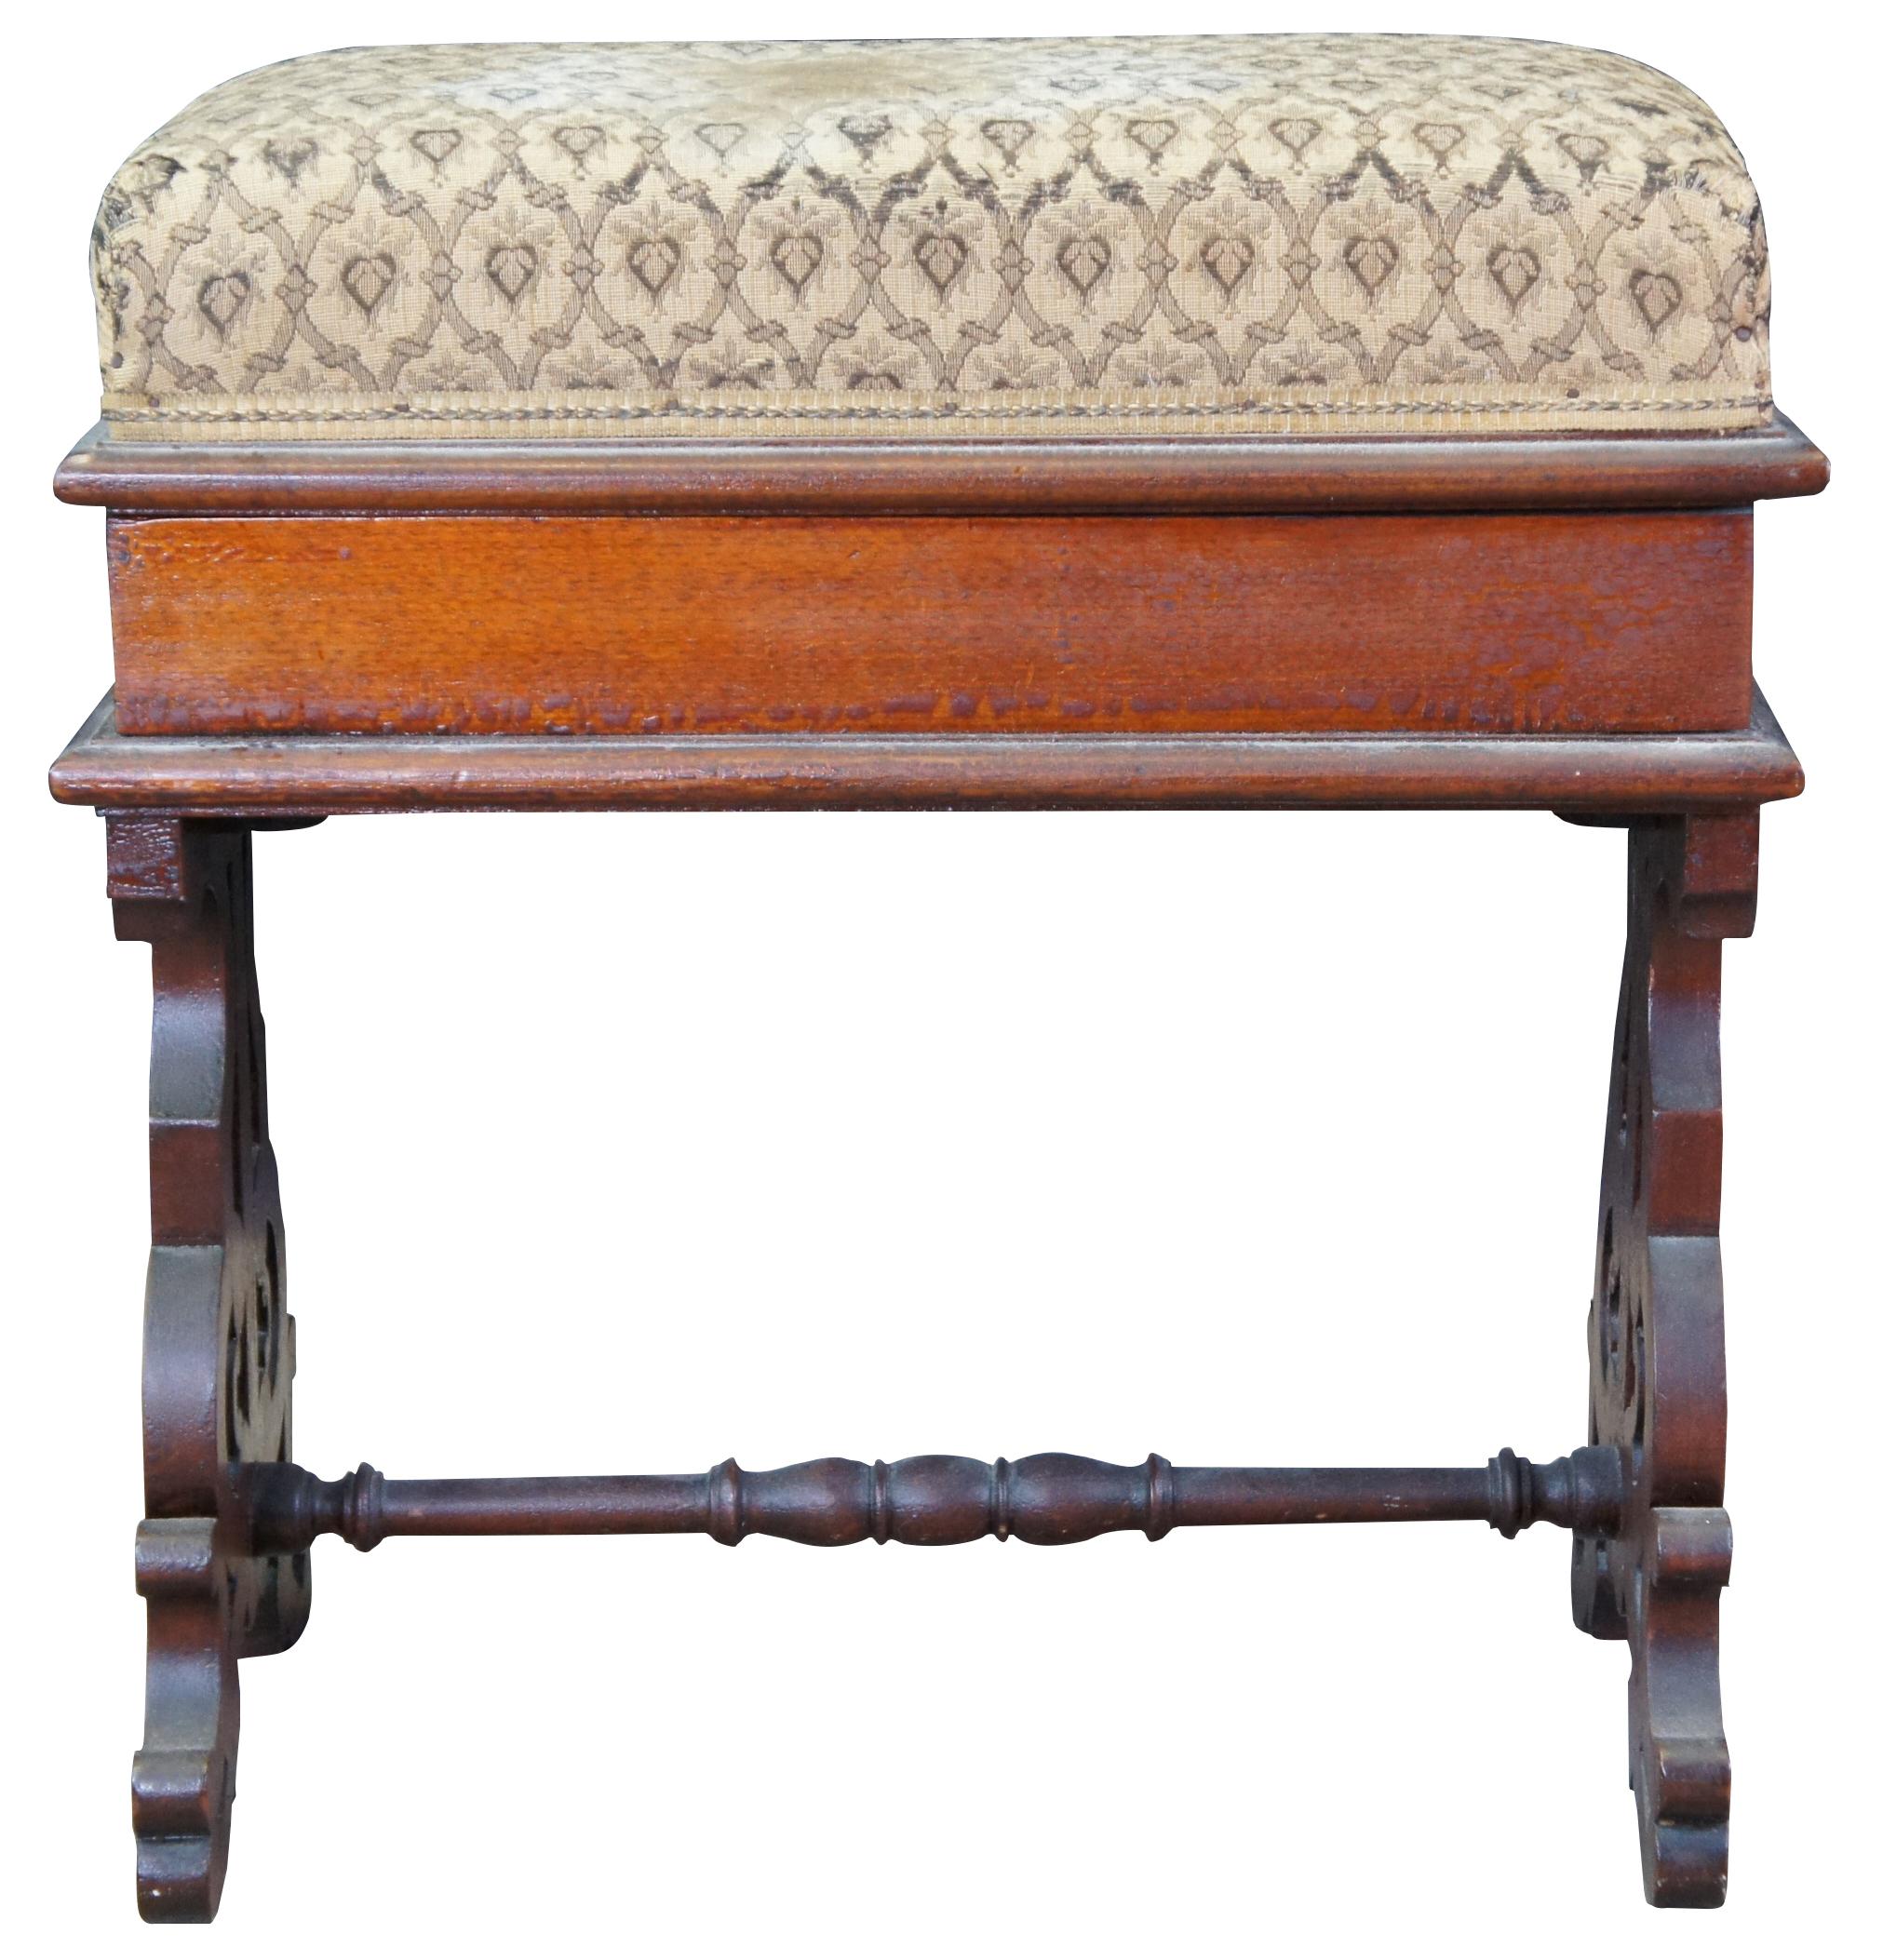 Antique Victorian piano stool or bench, circa last quarter 19th century. Made of walnut featuring rectangular form with cushioned flip top seat that opens to storage area. Supported by ornately pierced legs connected by a spool turned stretcher.
 